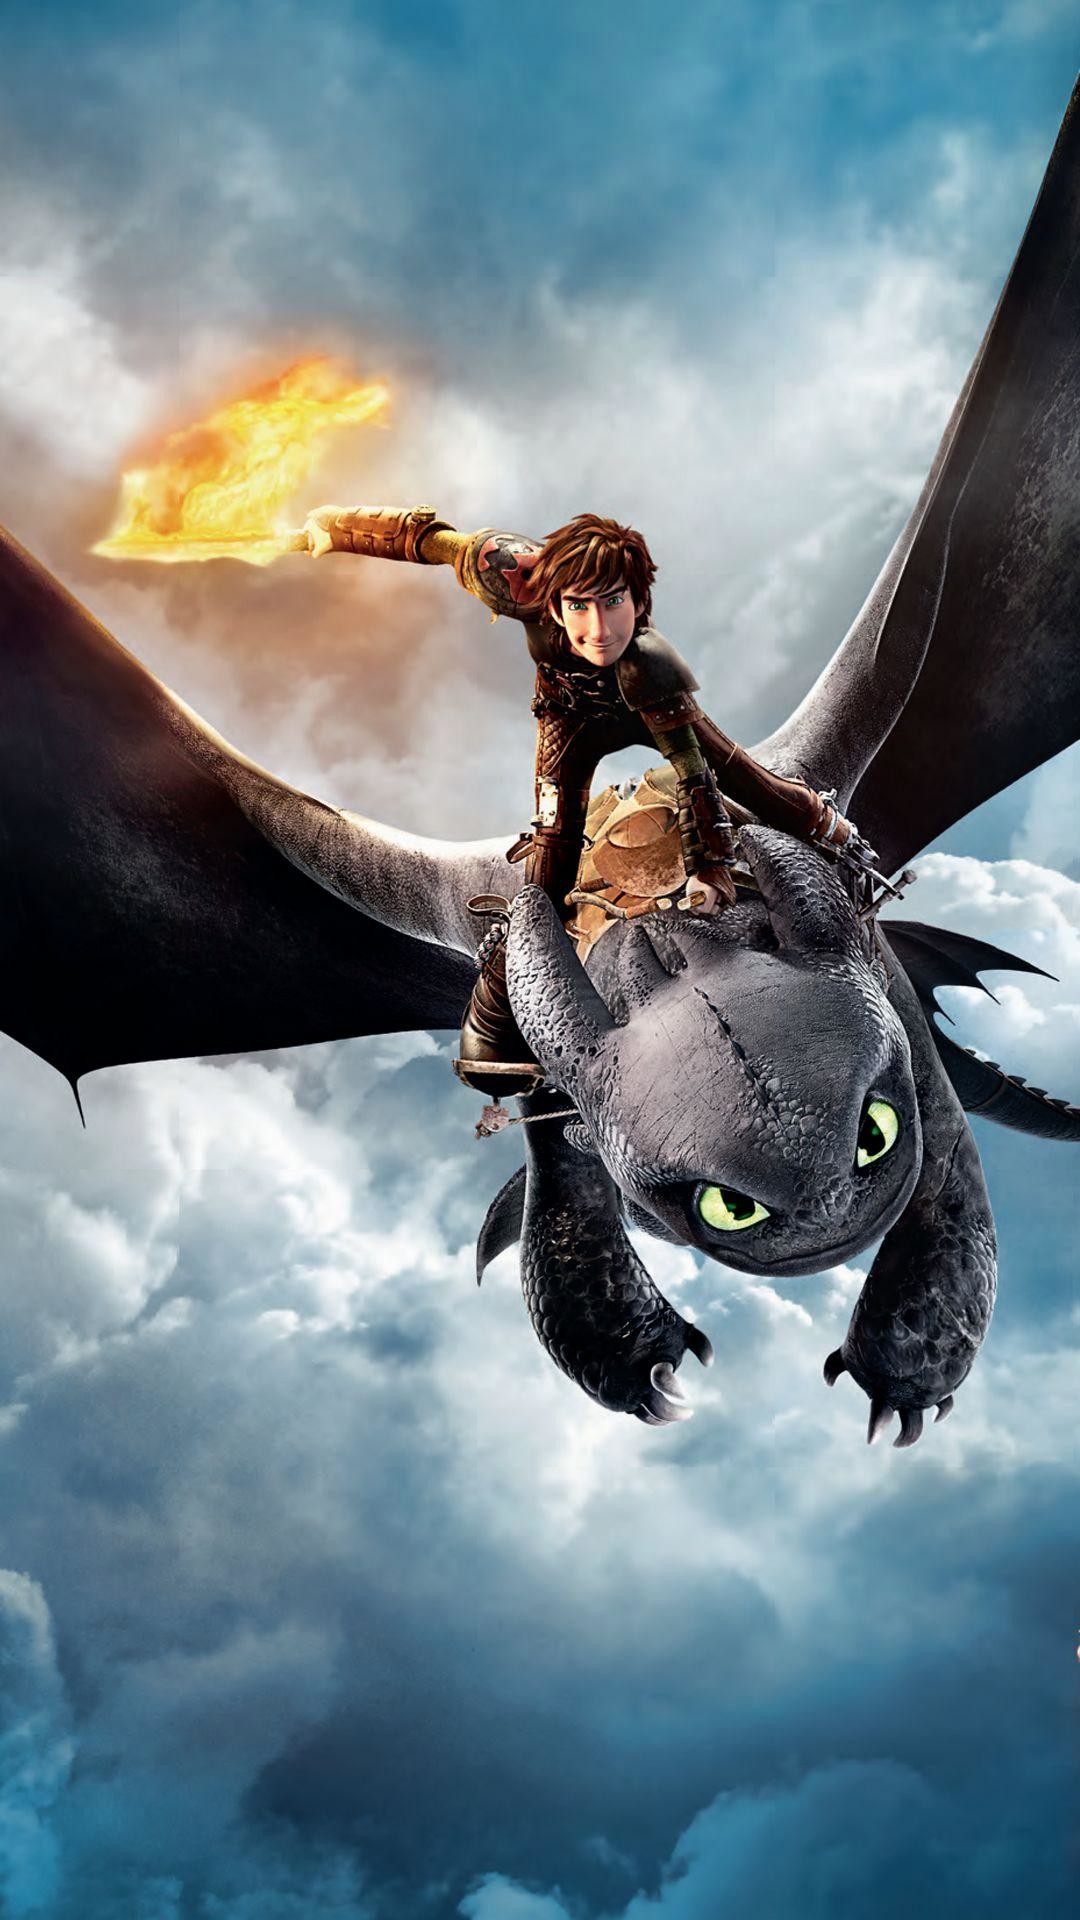 3d Wallpapers For Mobile For Touch Screen Free Download - Train Your Dragon  Riding Toothless - 1080x1920 Wallpaper 